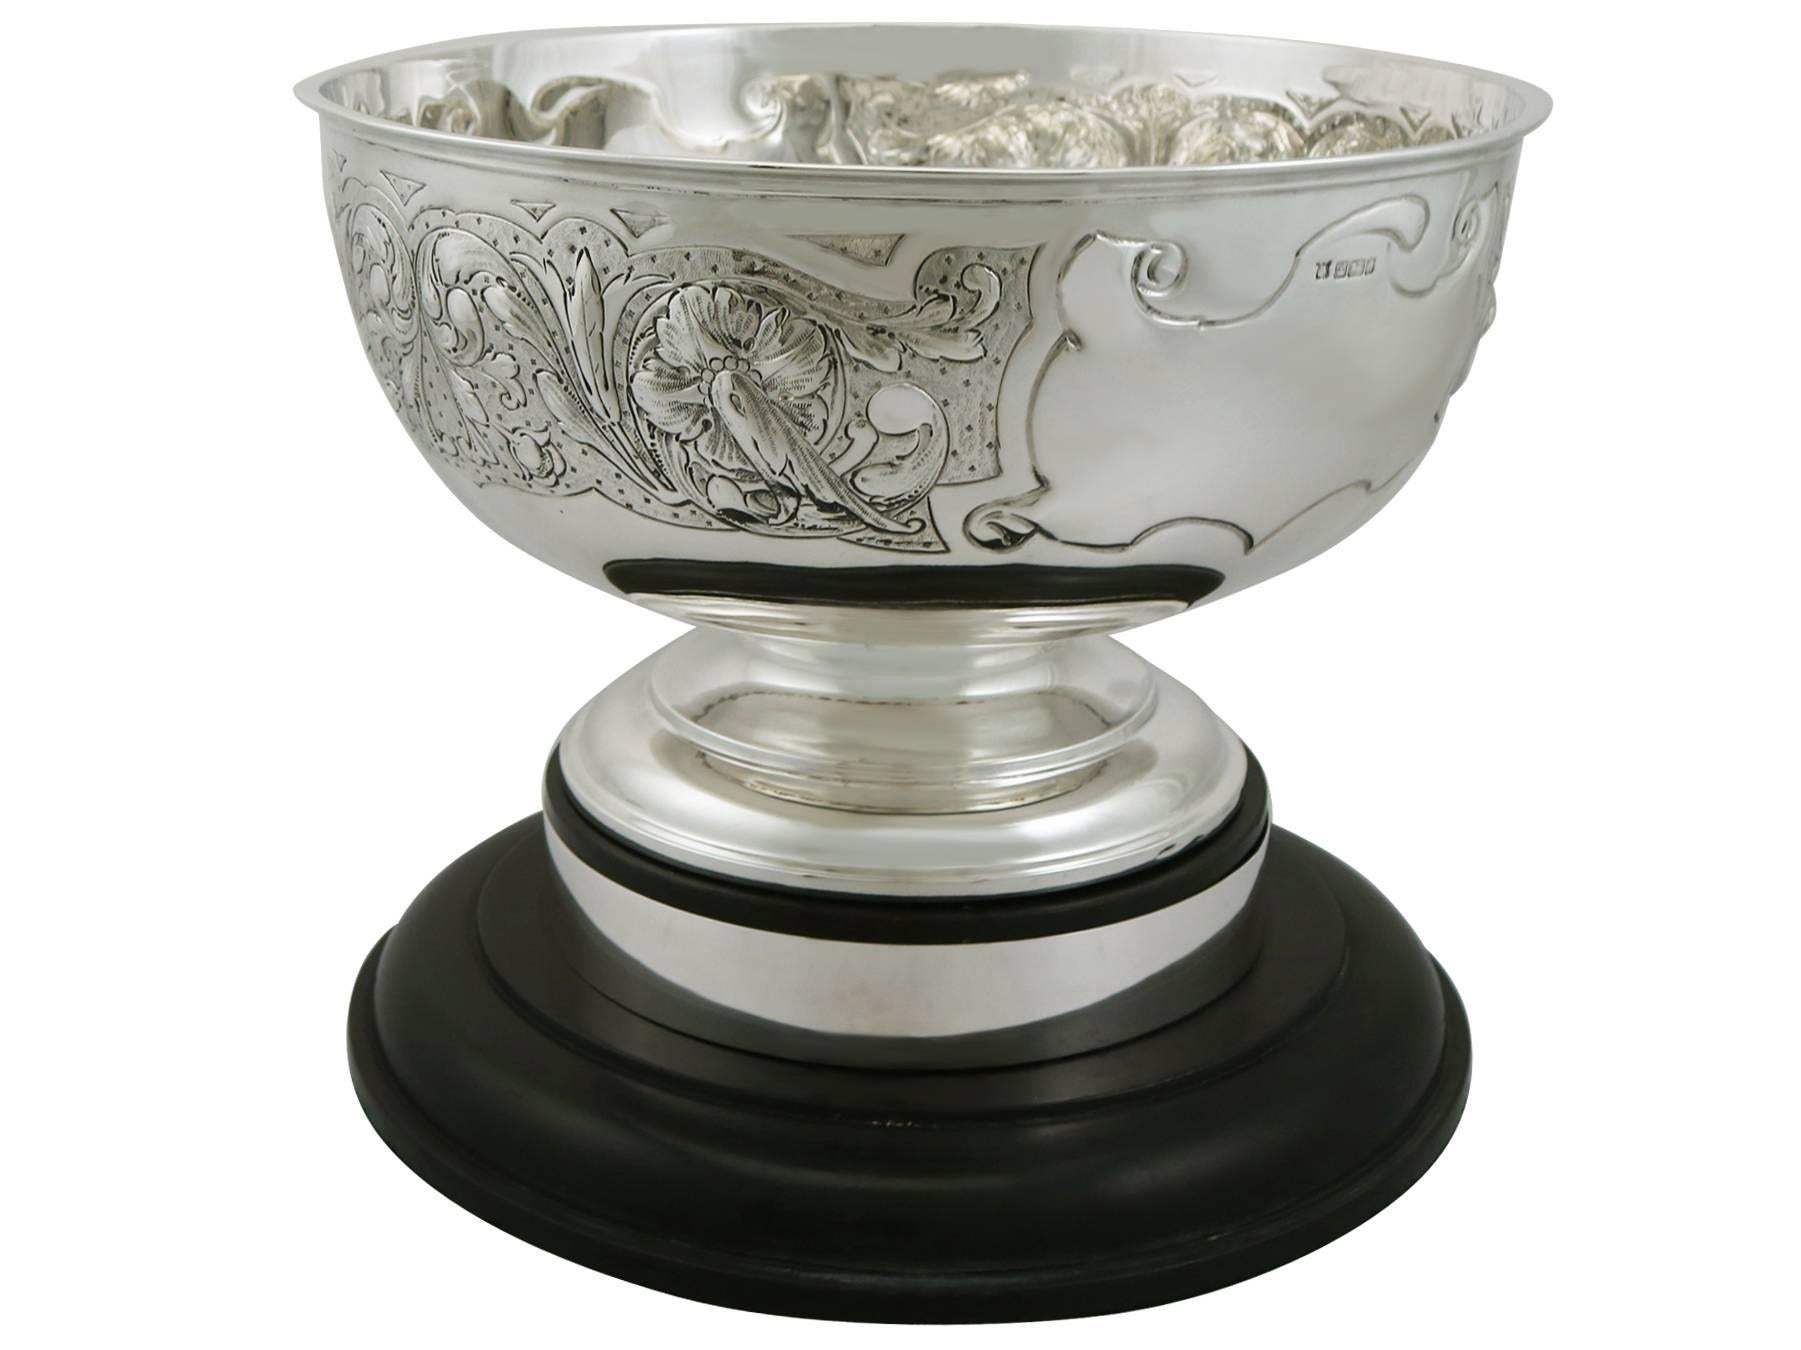 An exceptional, fine and impressive antique Edwardian English sterling silver presentation bowl; an addition to our ornamental silverware collection.

This exceptional antique Edwardian sterling silver presentation bowl has a plain circular